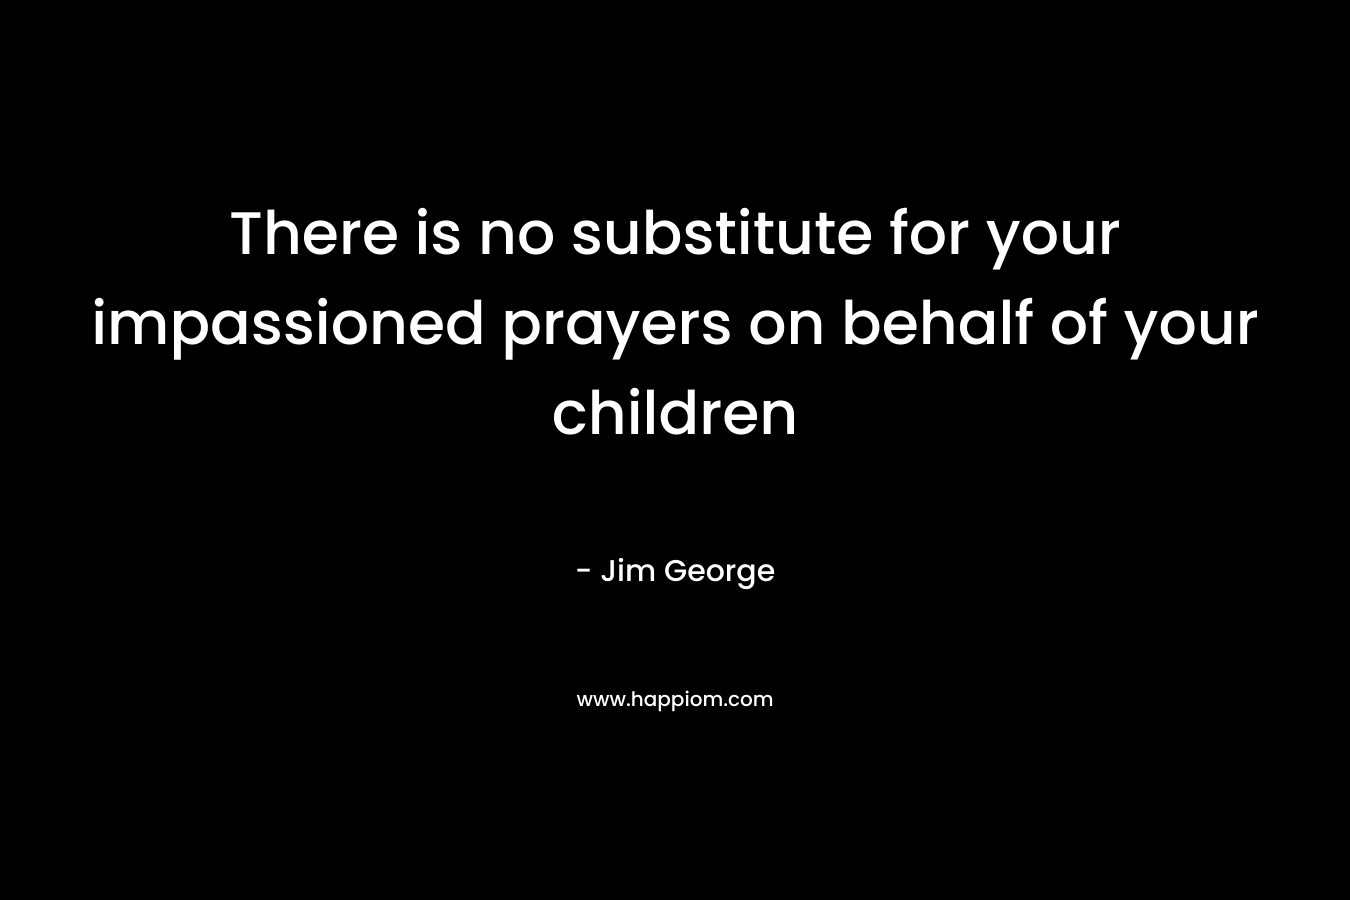 There is no substitute for your impassioned prayers on behalf of your children – Jim George